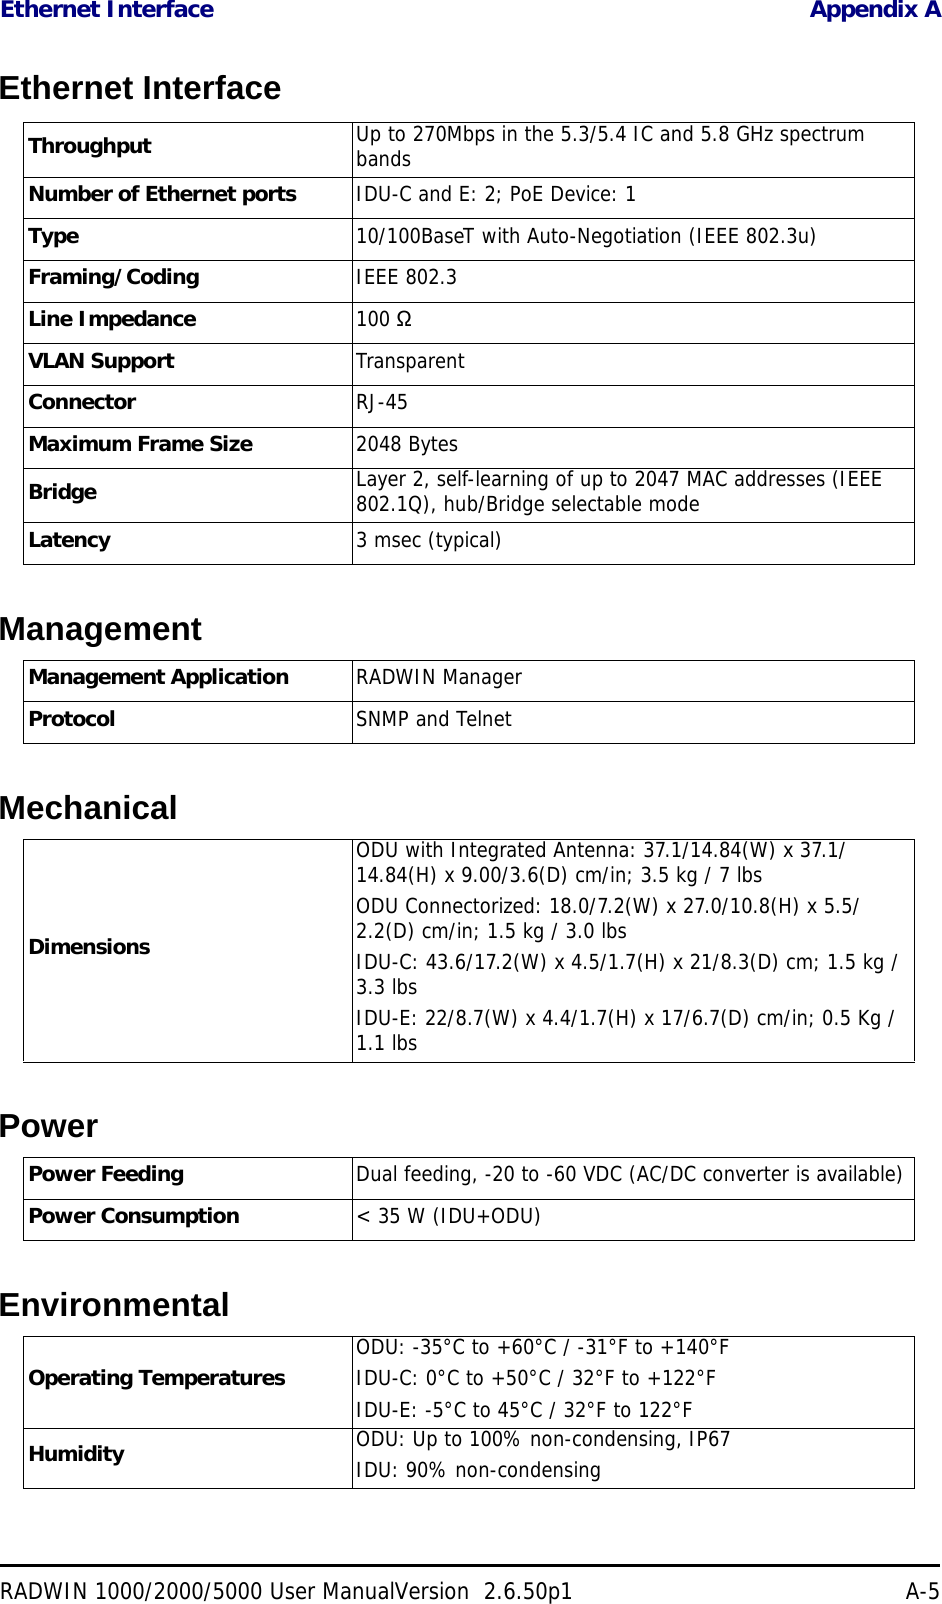 Ethernet Interface Appendix ARADWIN 1000/2000/5000 User ManualVersion  2.6.50p1 A-5Ethernet InterfaceManagementMechanicalPowerEnvironmentalThroughput Up to 270Mbps in the 5.3/5.4 IC and 5.8 GHz spectrum bandsNumber of Ethernet ports IDU-C and E: 2; PoE Device: 1Type 10/100BaseT with Auto-Negotiation (IEEE 802.3u)Framing/Coding IEEE 802.3Line Impedance 100 ΩVLAN Support TransparentConnector RJ-45Maximum Frame Size 2048 BytesBridge Layer 2, self-learning of up to 2047 MAC addresses (IEEE 802.1Q), hub/Bridge selectable modeLatency 3 msec (typical)Management Application RADWIN ManagerProtocol SNMP and TelnetDimensionsODU with Integrated Antenna: 37.1/14.84(W) x 37.1/14.84(H) x 9.00/3.6(D) cm/in; 3.5 kg / 7 lbsODU Connectorized: 18.0/7.2(W) x 27.0/10.8(H) x 5.5/2.2(D) cm/in; 1.5 kg / 3.0 lbsIDU-C: 43.6/17.2(W) x 4.5/1.7(H) x 21/8.3(D) cm; 1.5 kg / 3.3 lbsIDU-E: 22/8.7(W) x 4.4/1.7(H) x 17/6.7(D) cm/in; 0.5 Kg / 1.1 lbsPower Feeding Dual feeding, -20 to -60 VDC (AC/DC converter is available)Power Consumption &lt; 35 W (IDU+ODU)Operating Temperatures ODU: -35°C to +60°C / -31°F to +140°FIDU-C: 0°C to +50°C / 32°F to +122°FIDU-E: -5°C to 45°C / 32°F to 122°FHumidity ODU: Up to 100% non-condensing, IP67IDU: 90% non-condensing